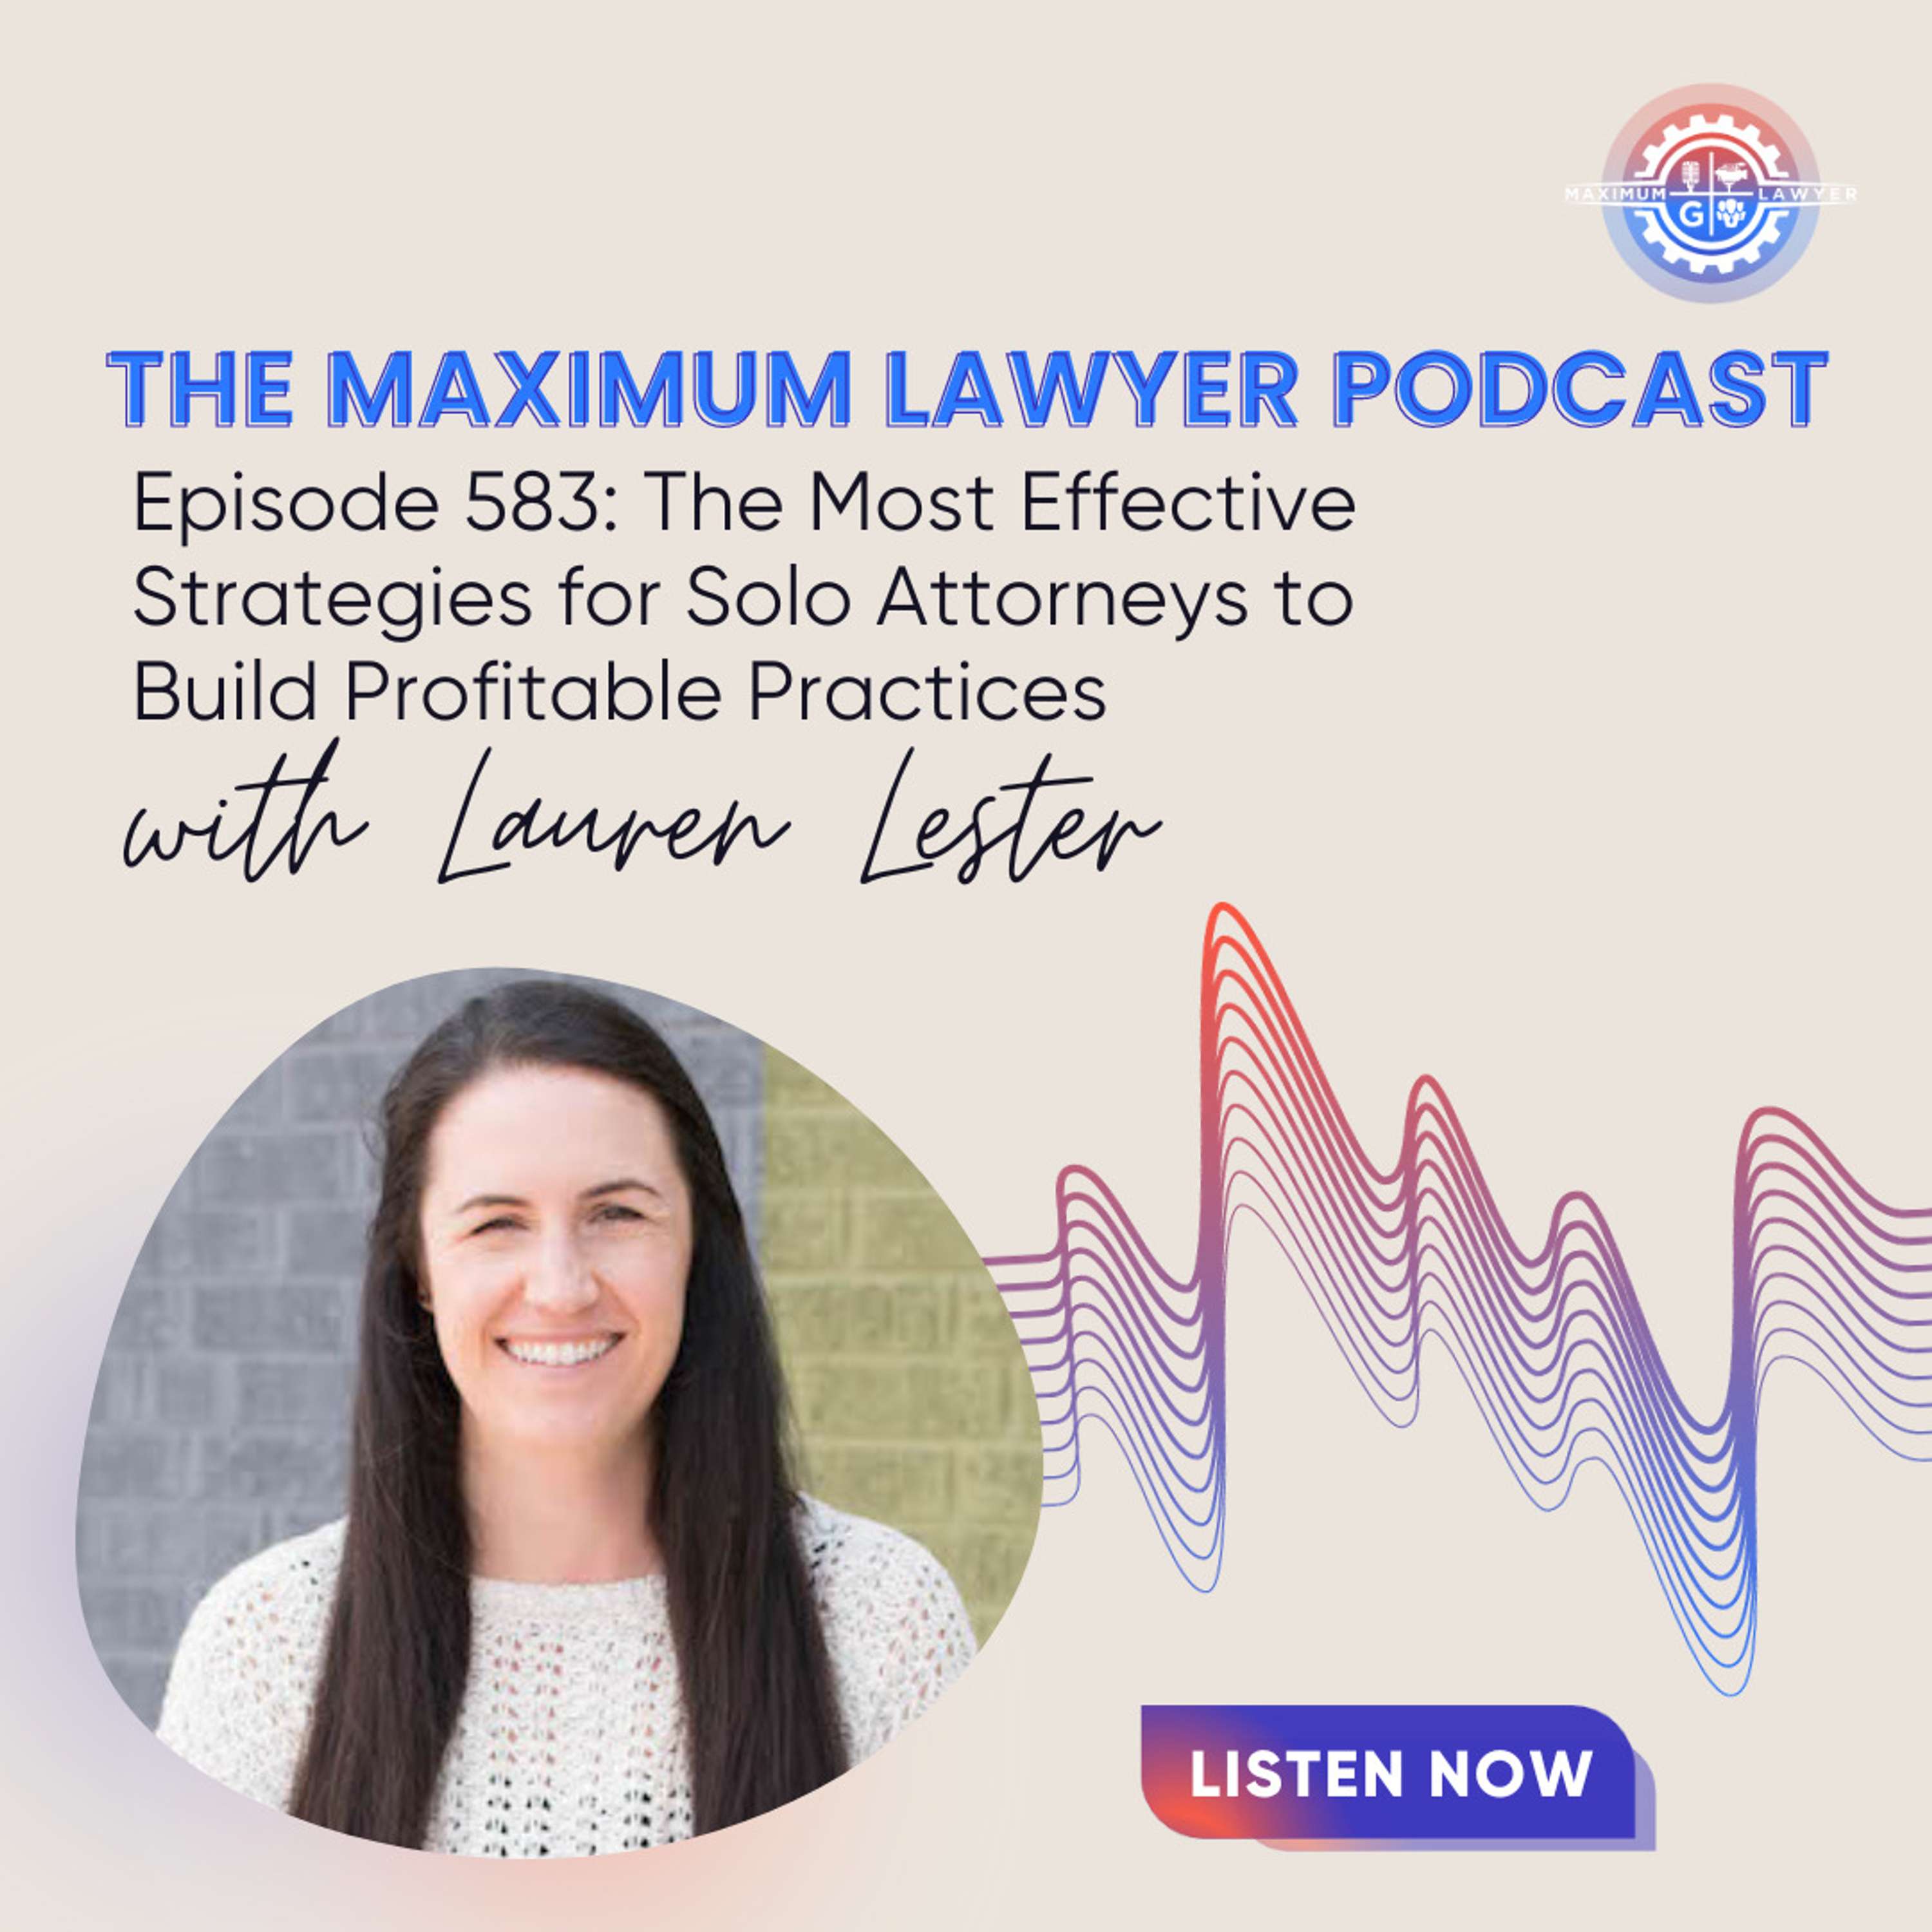 The Most Effective Strategies for Solo Attorneys to Build Profitable Practices with Lauren Lester